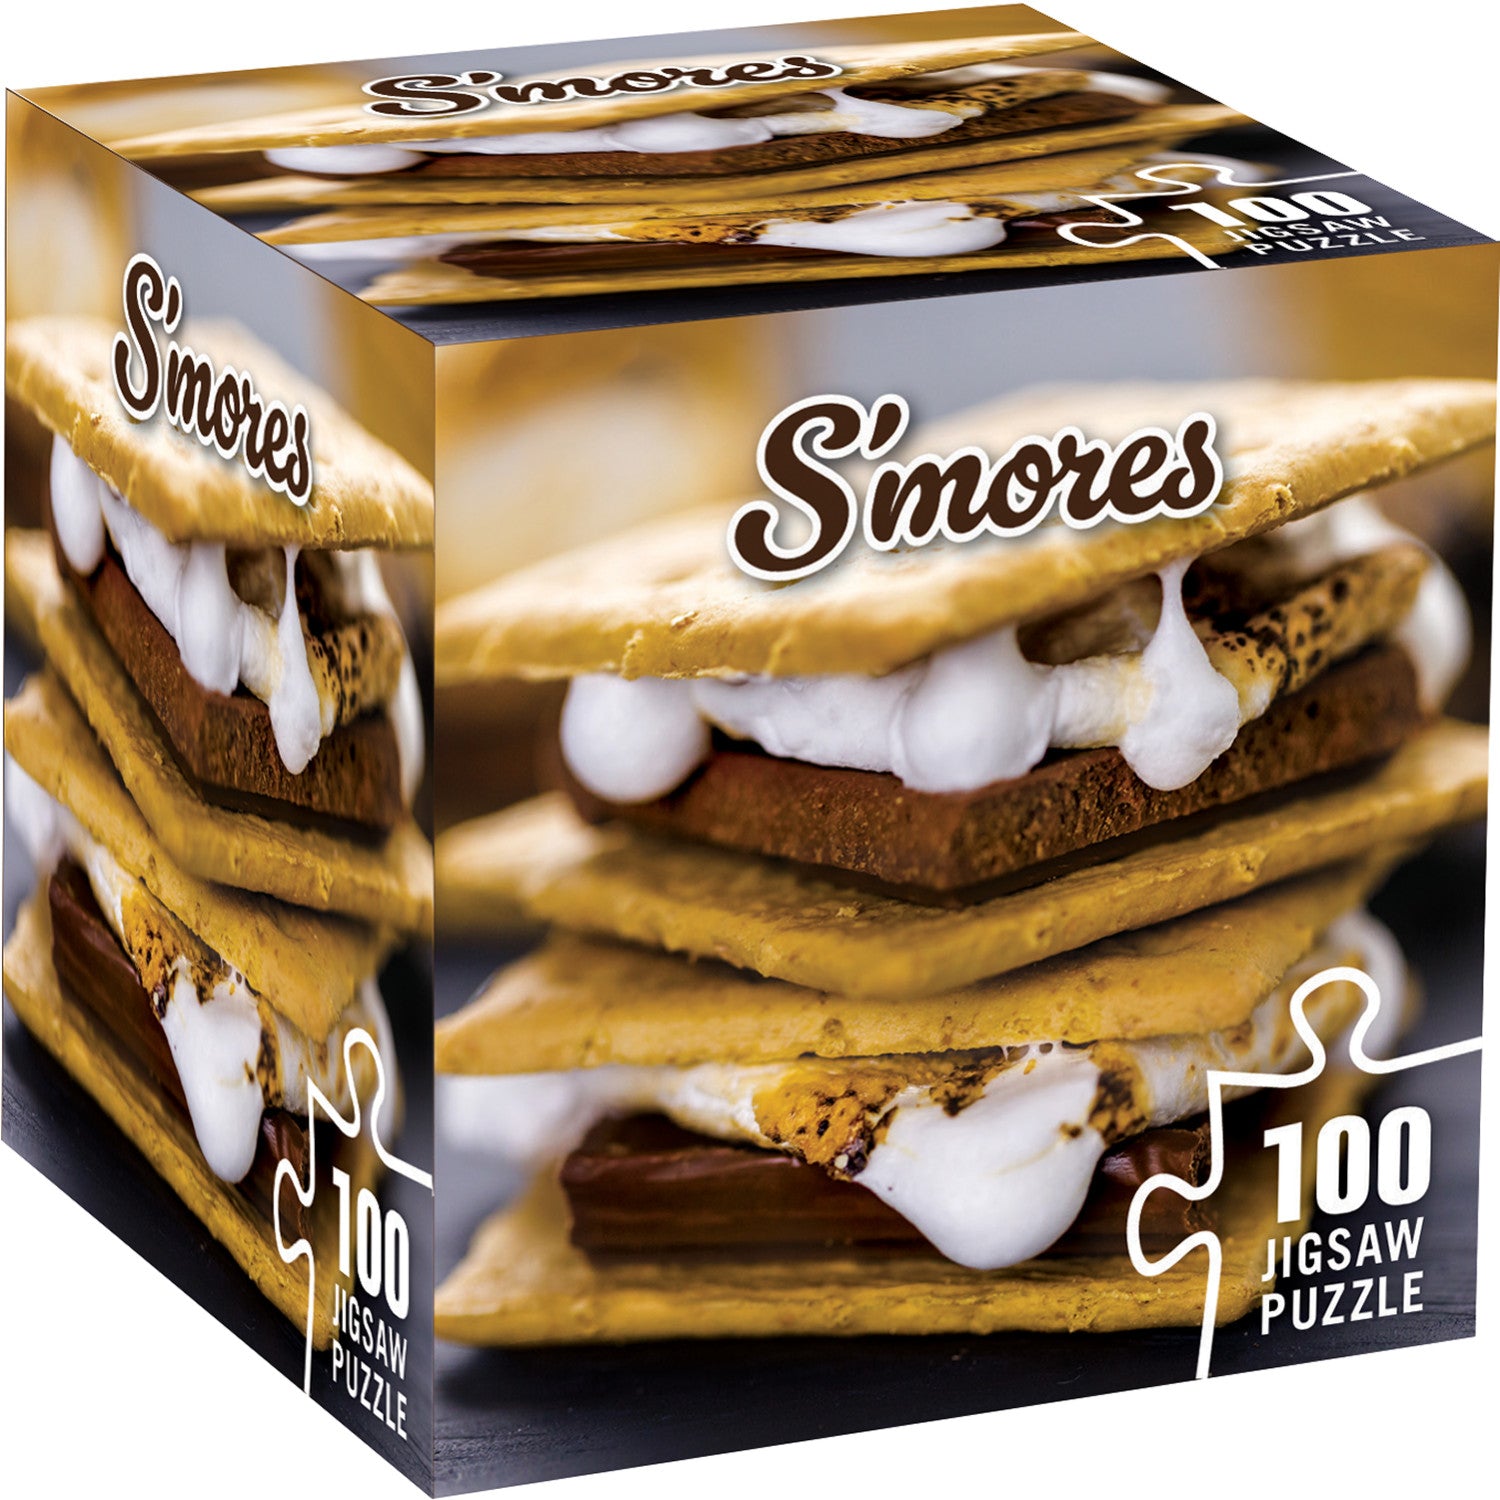 S'mores 100 Piece Jigsaw Puzzle